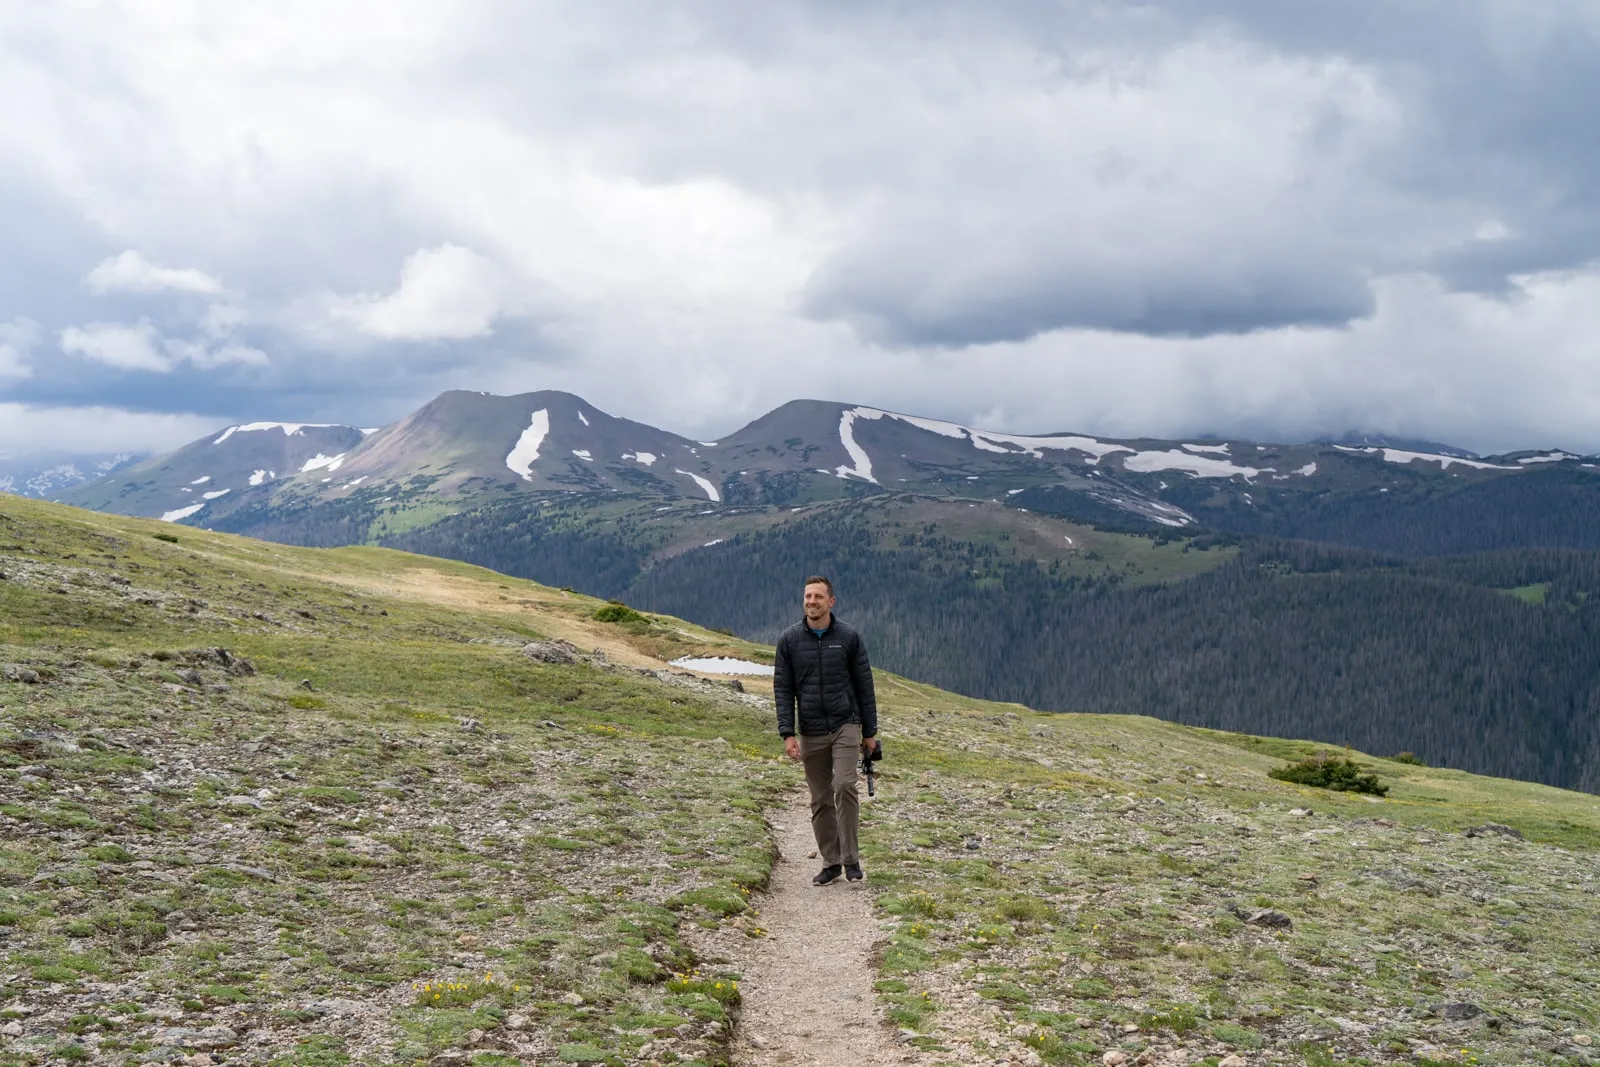 The Ultimate Guide to Visiting Rocky Mountain National Park (Tips, things to do, where to stay, & itineraries!)